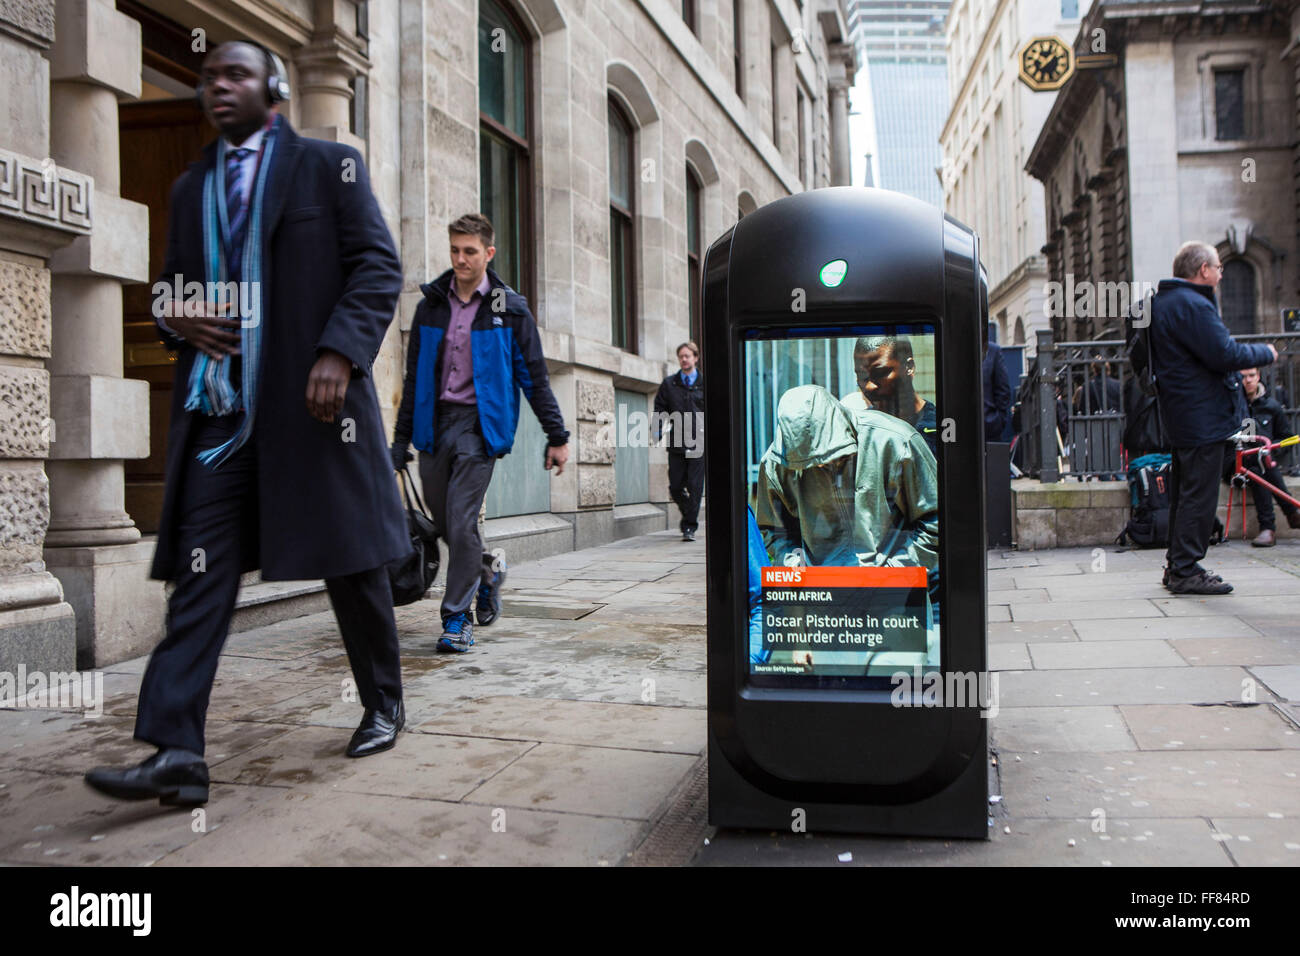 London Implements “Smart Bins” Before 2012 Olympics